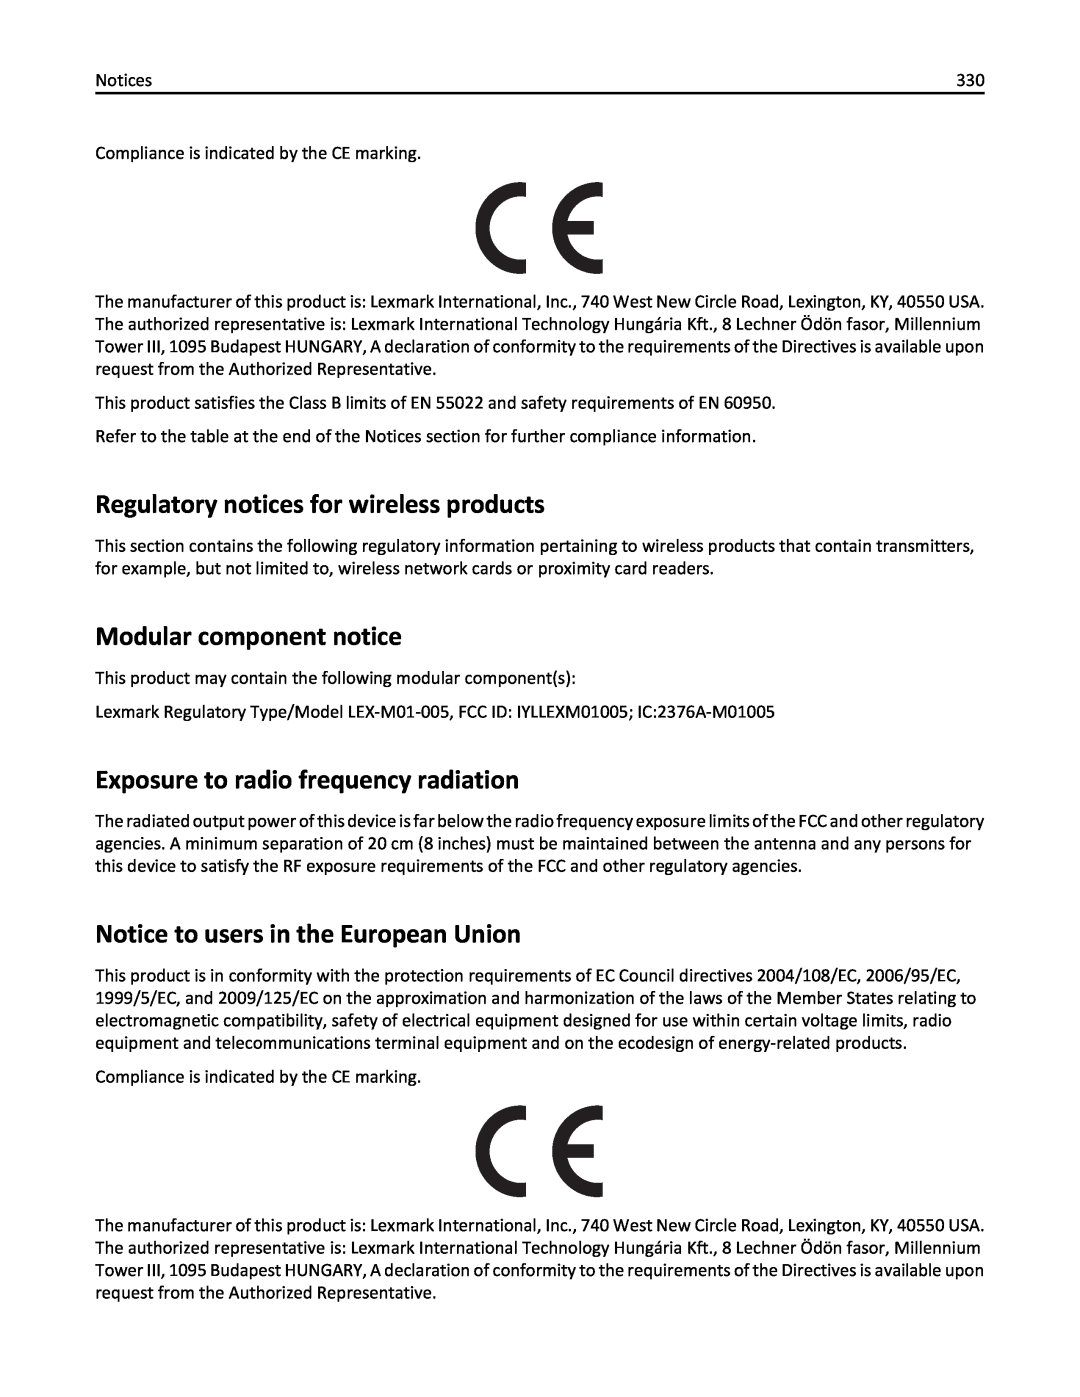 Lexmark 436 Regulatory notices for wireless products, Modular component notice, Exposure to radio frequency radiation 